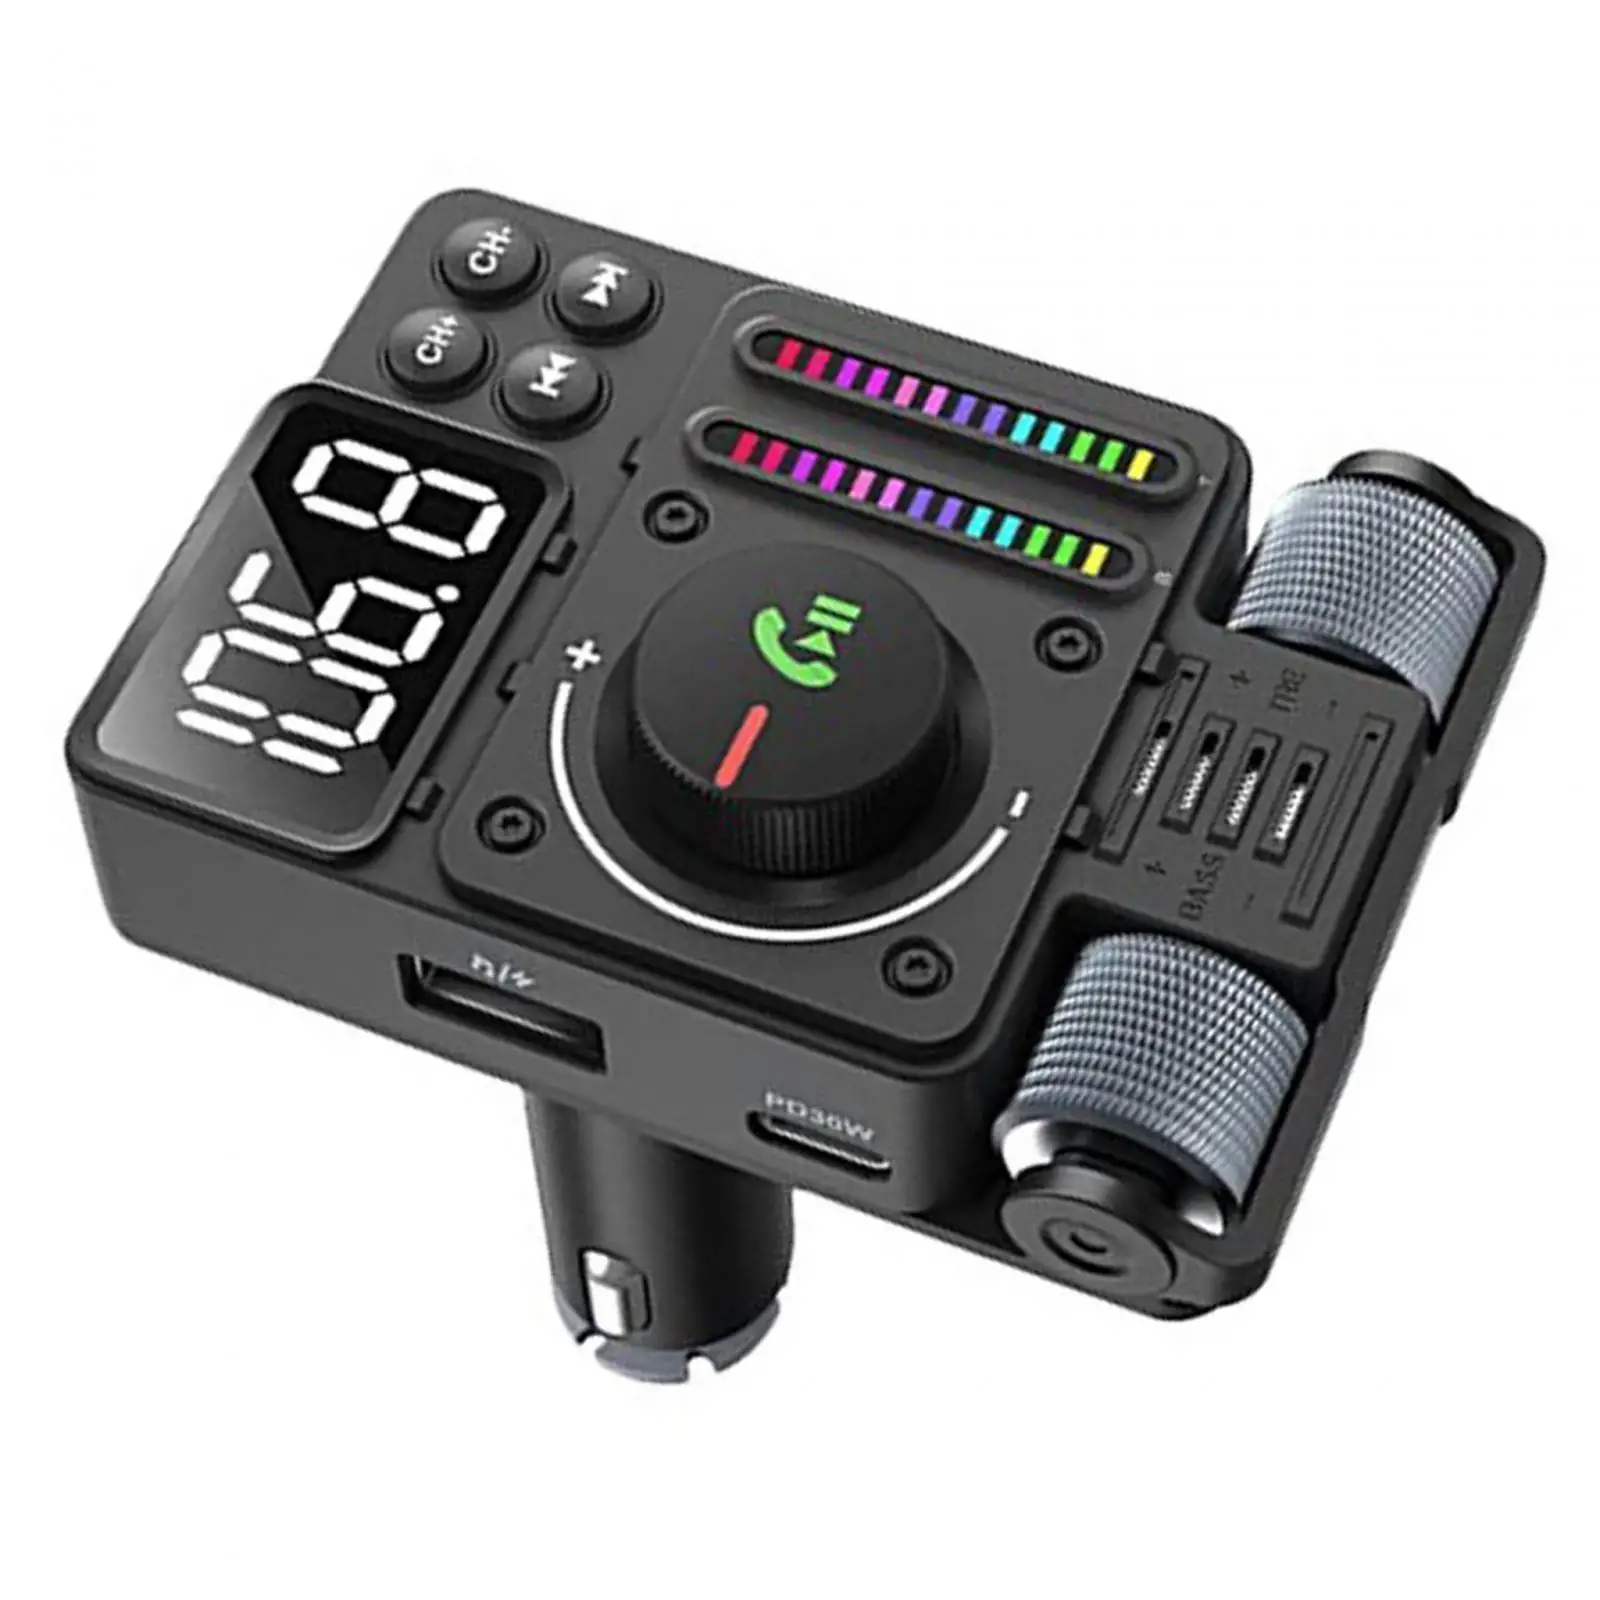 Bluetooth FM Transmitter Vehicle Stable Performance Replace Wireless Radio